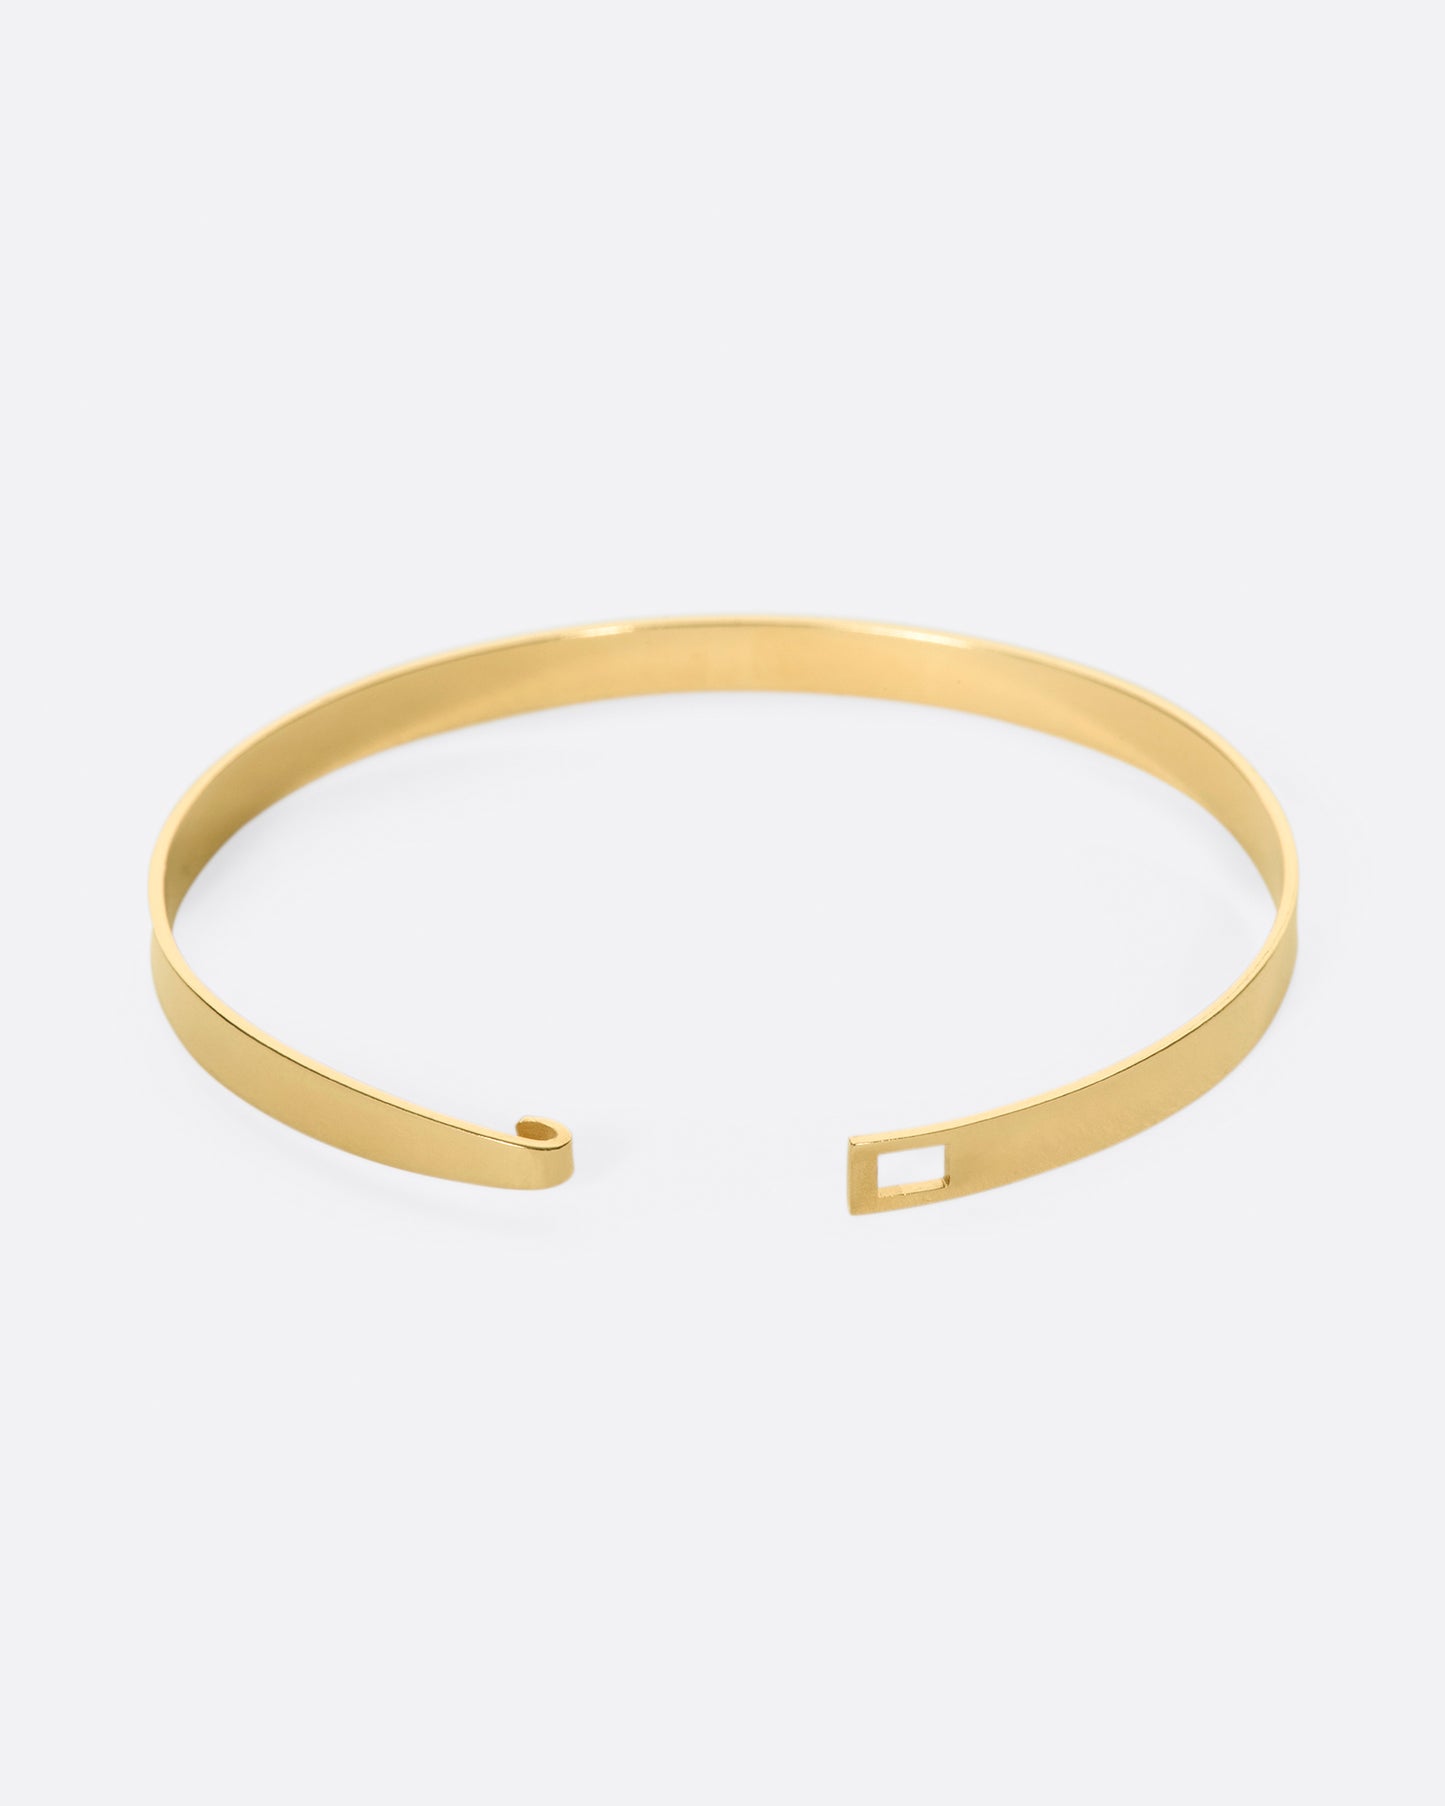 A simple and sturdy gold bracelet, perfect on its own or layered with your other favorite pieces.